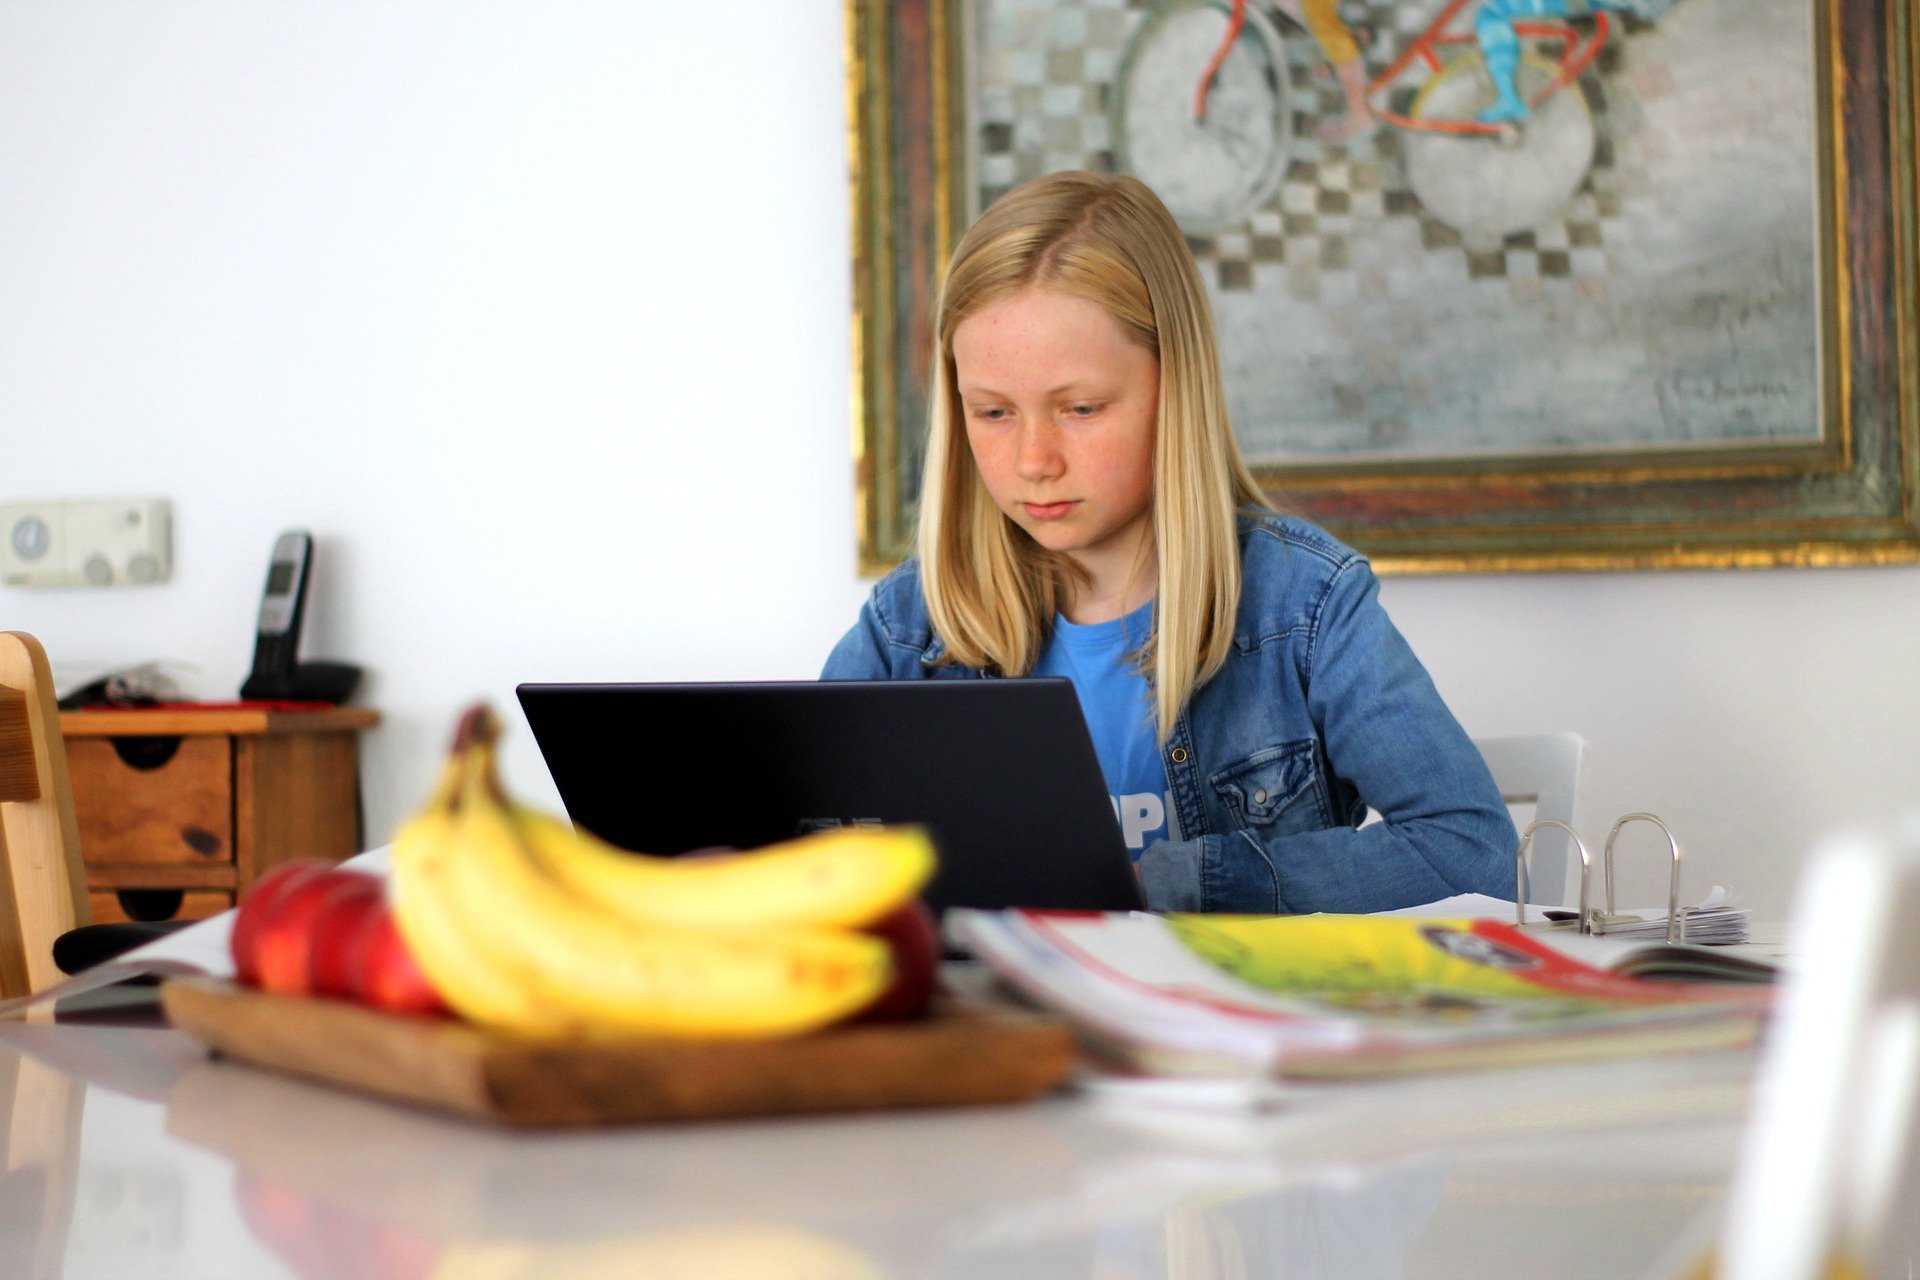 A child sits at a desk looking at a laptop